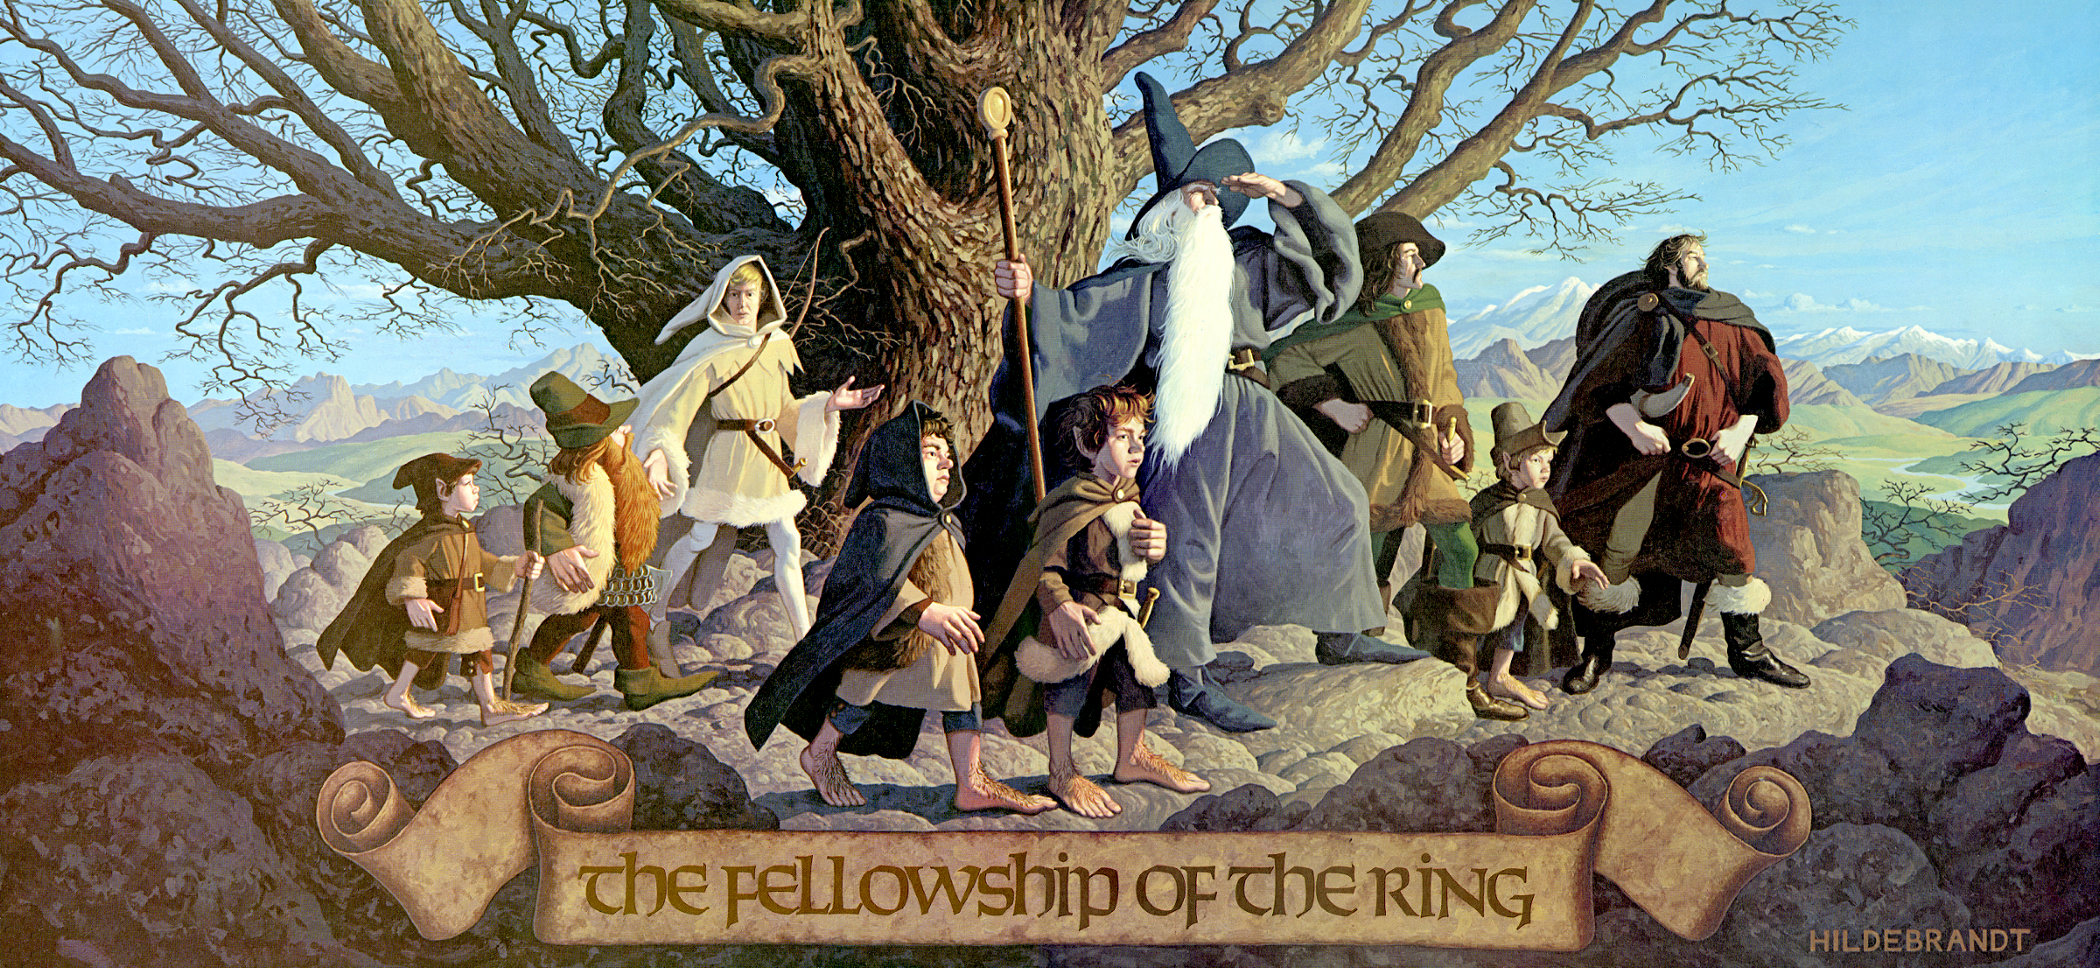 Beautiful Lord of the Rings-inspired fantasy wallpaper.